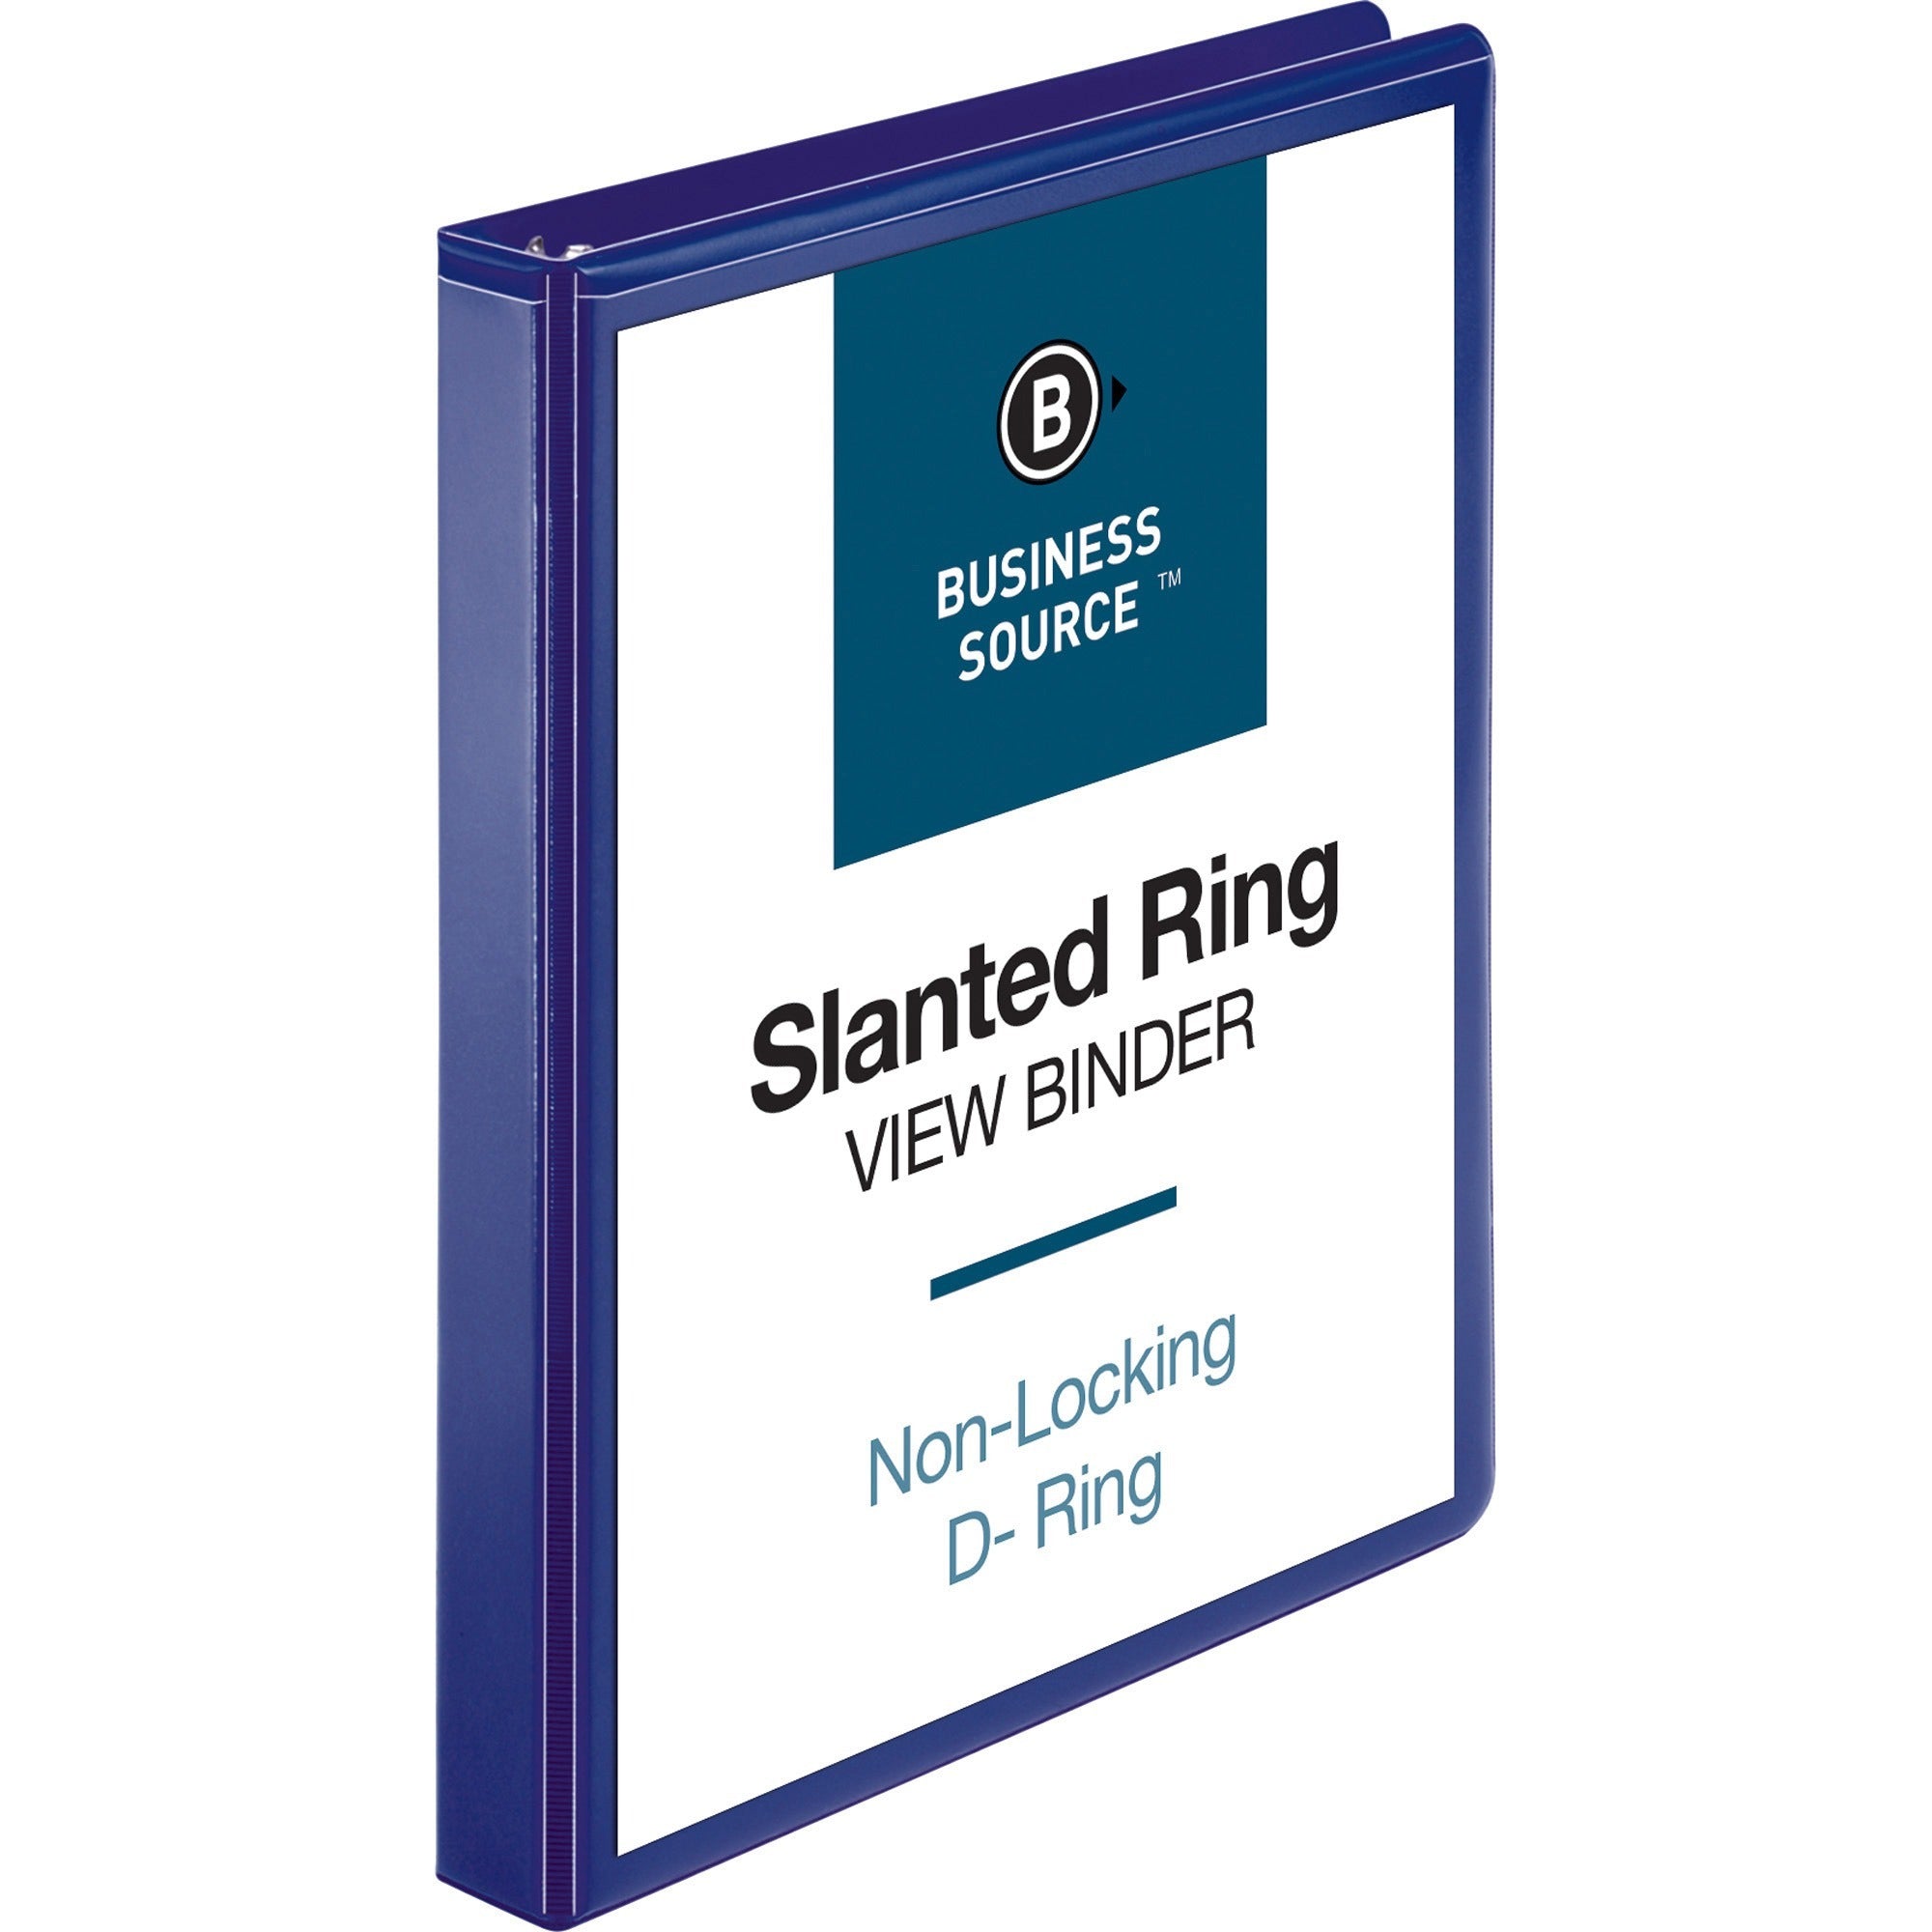 business-source-d-ring-view-binder-1-binder-capacity-slant-d-ring-fasteners-internal-pockets-navy-clear-overlay-labeling-area-lay-flat-pocket-1-each_bsn28452 - 1